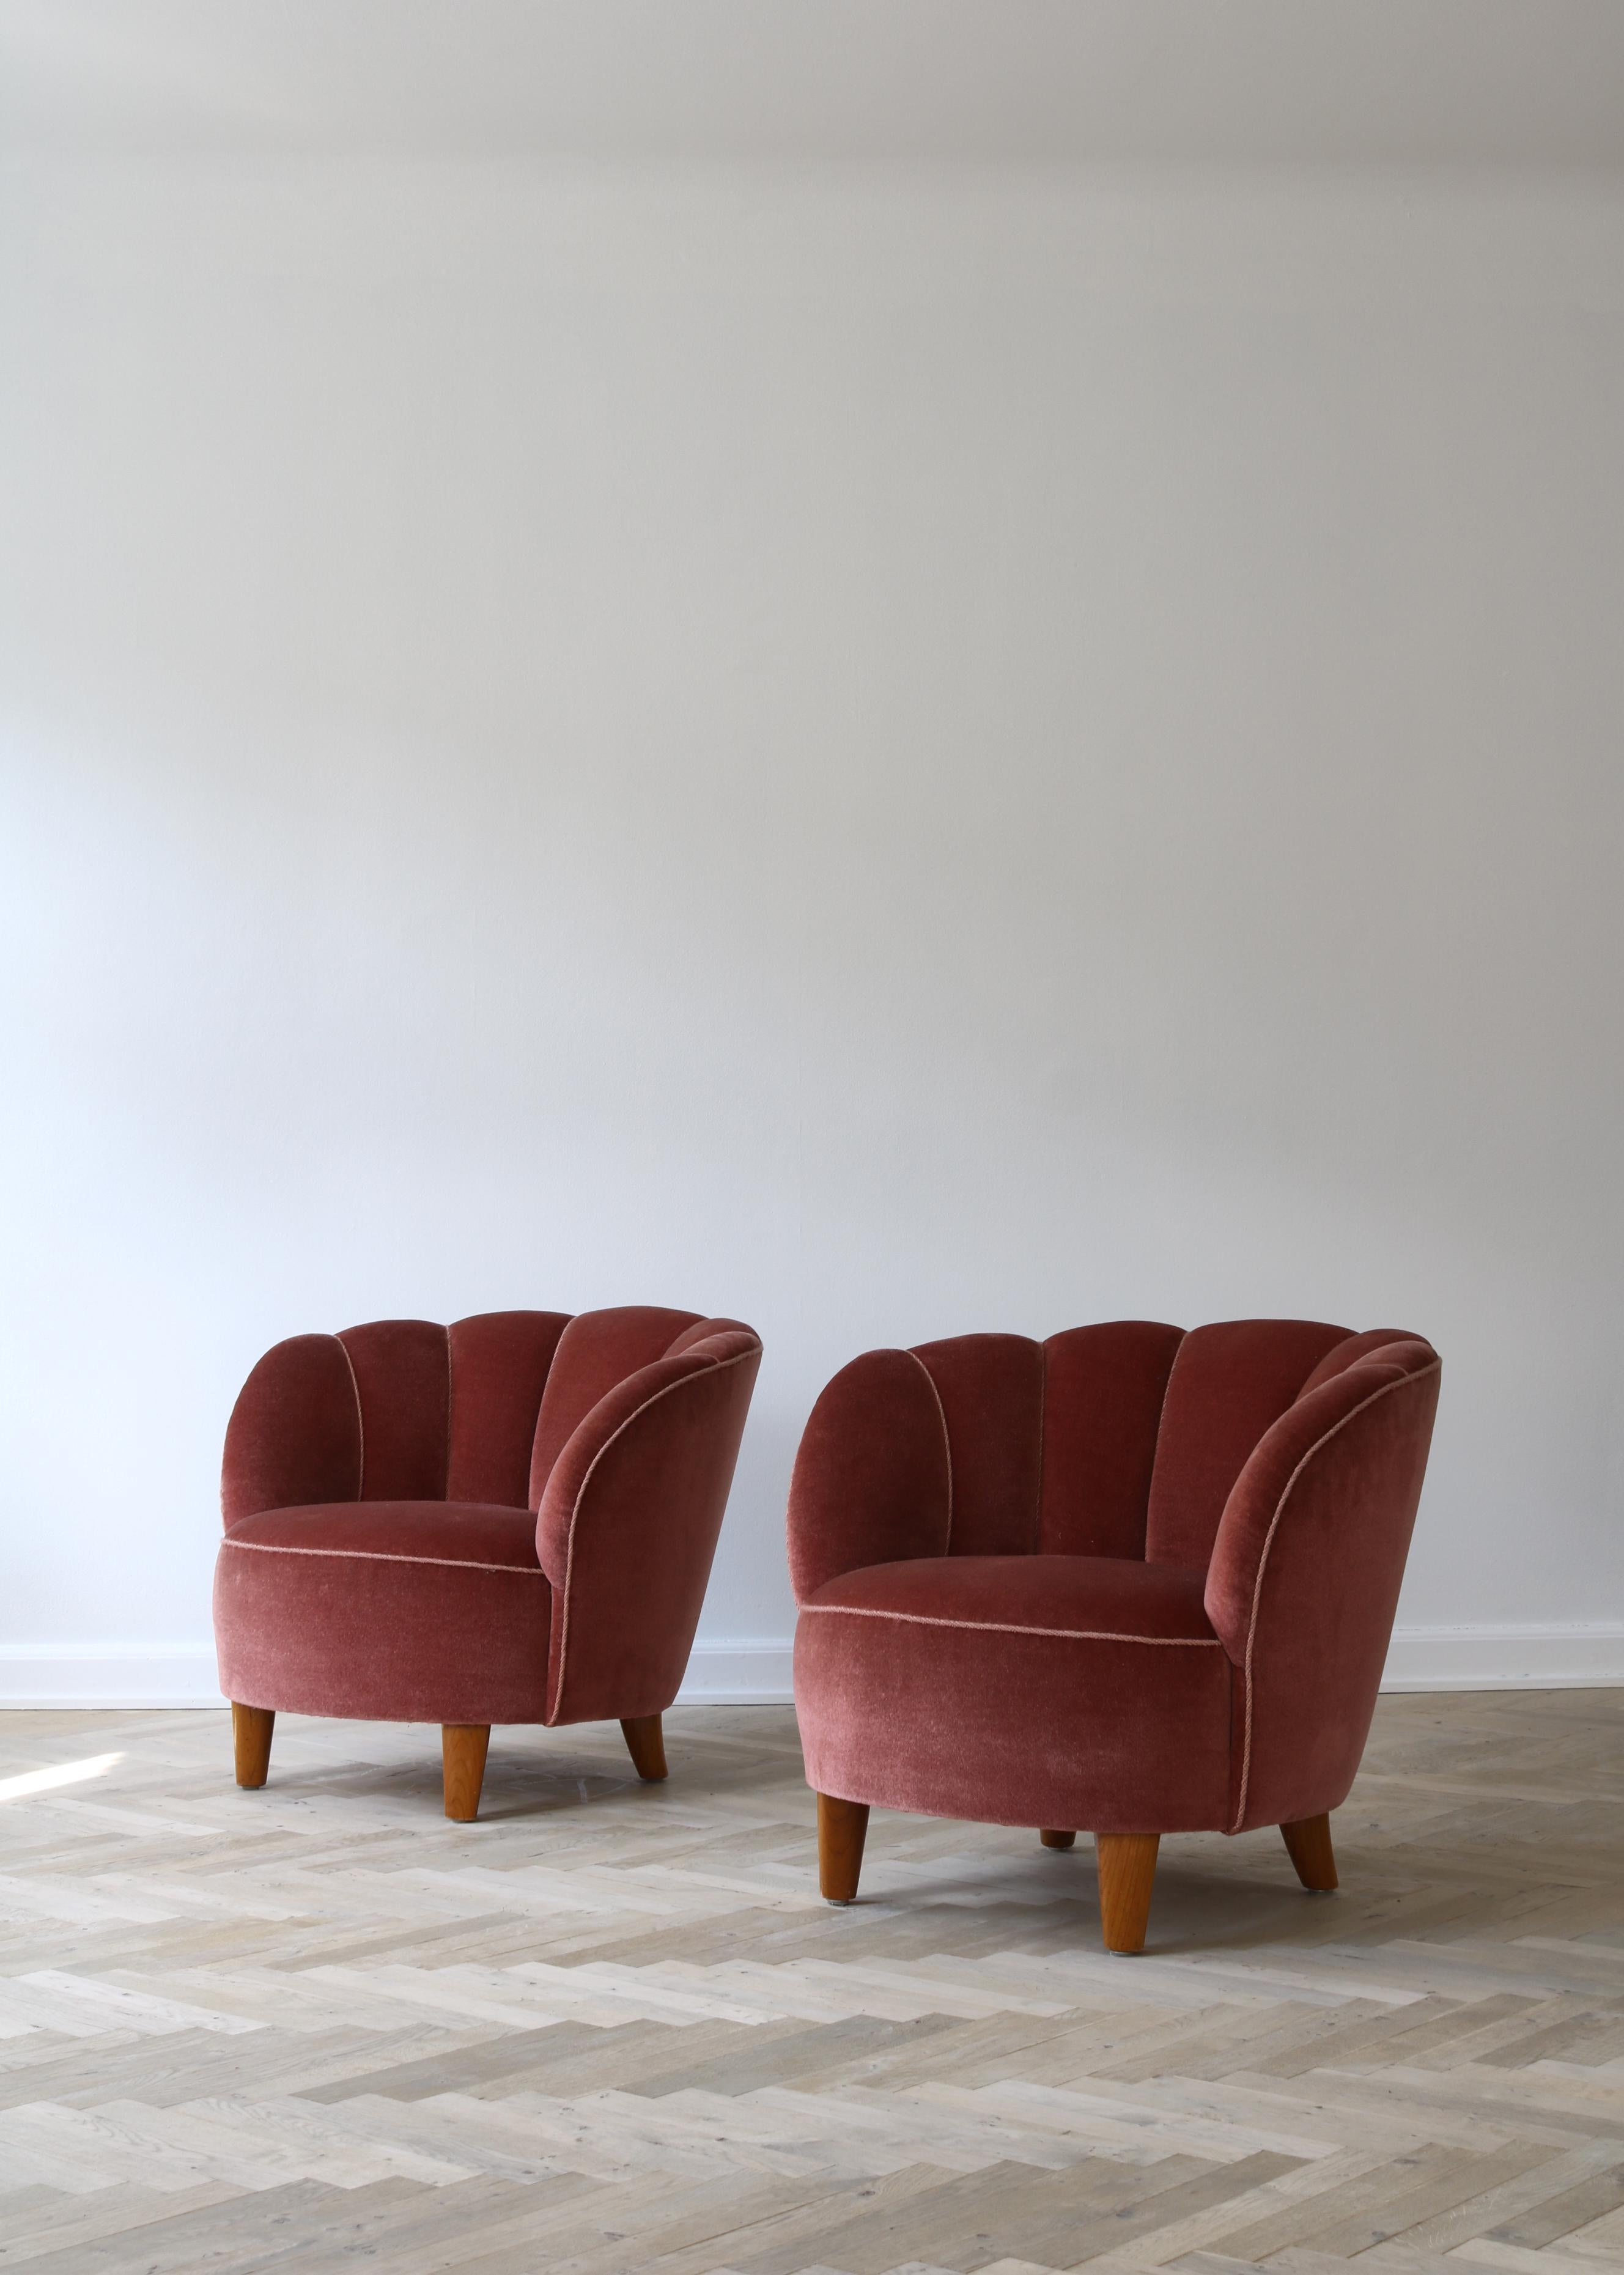 Mid-20th Century 1940s Lounge Chairs in Pink Velvet, Otto Schulz for Boet, Scandinavian Modern